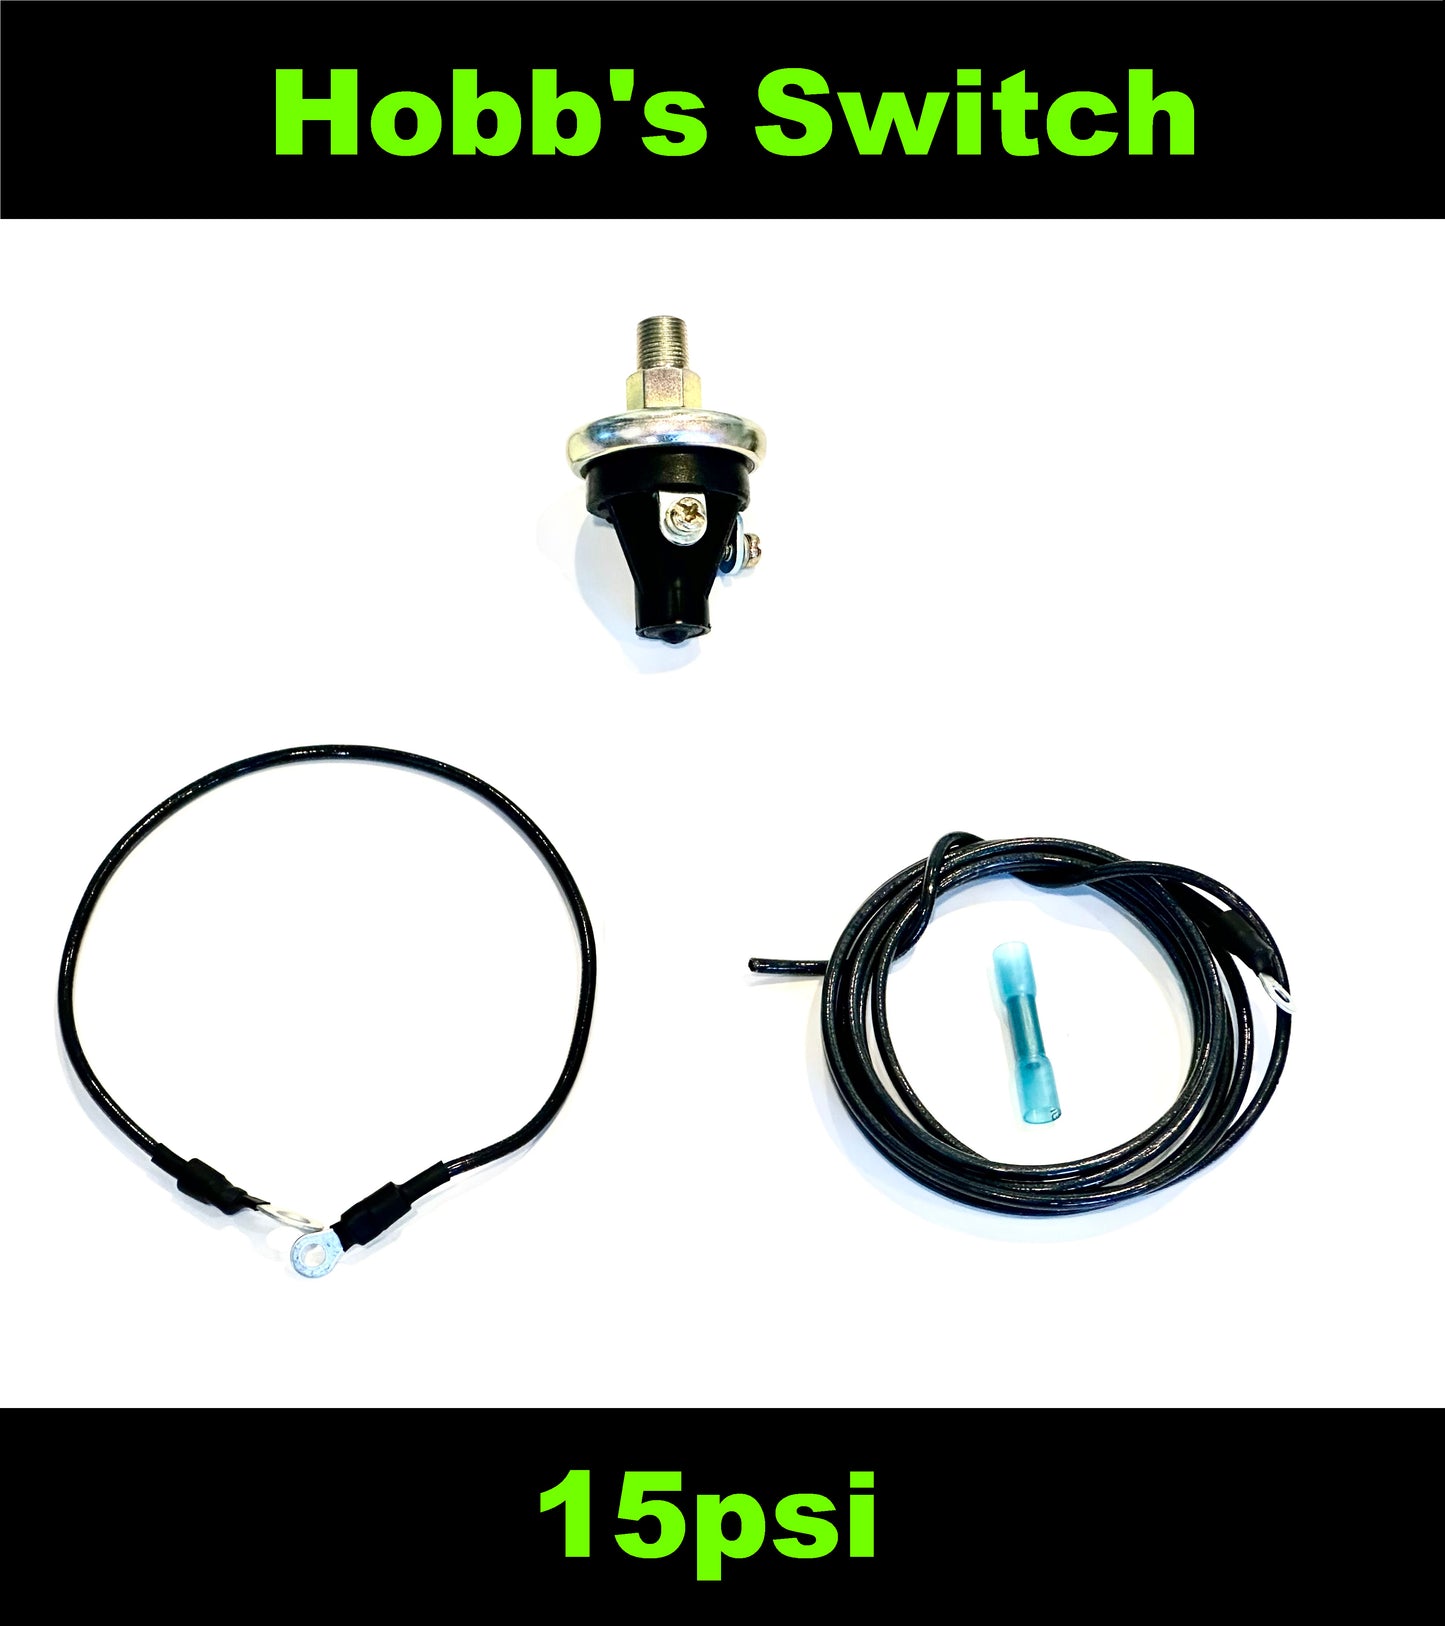 Adjustable Hobbs Switch with Wiring Harness